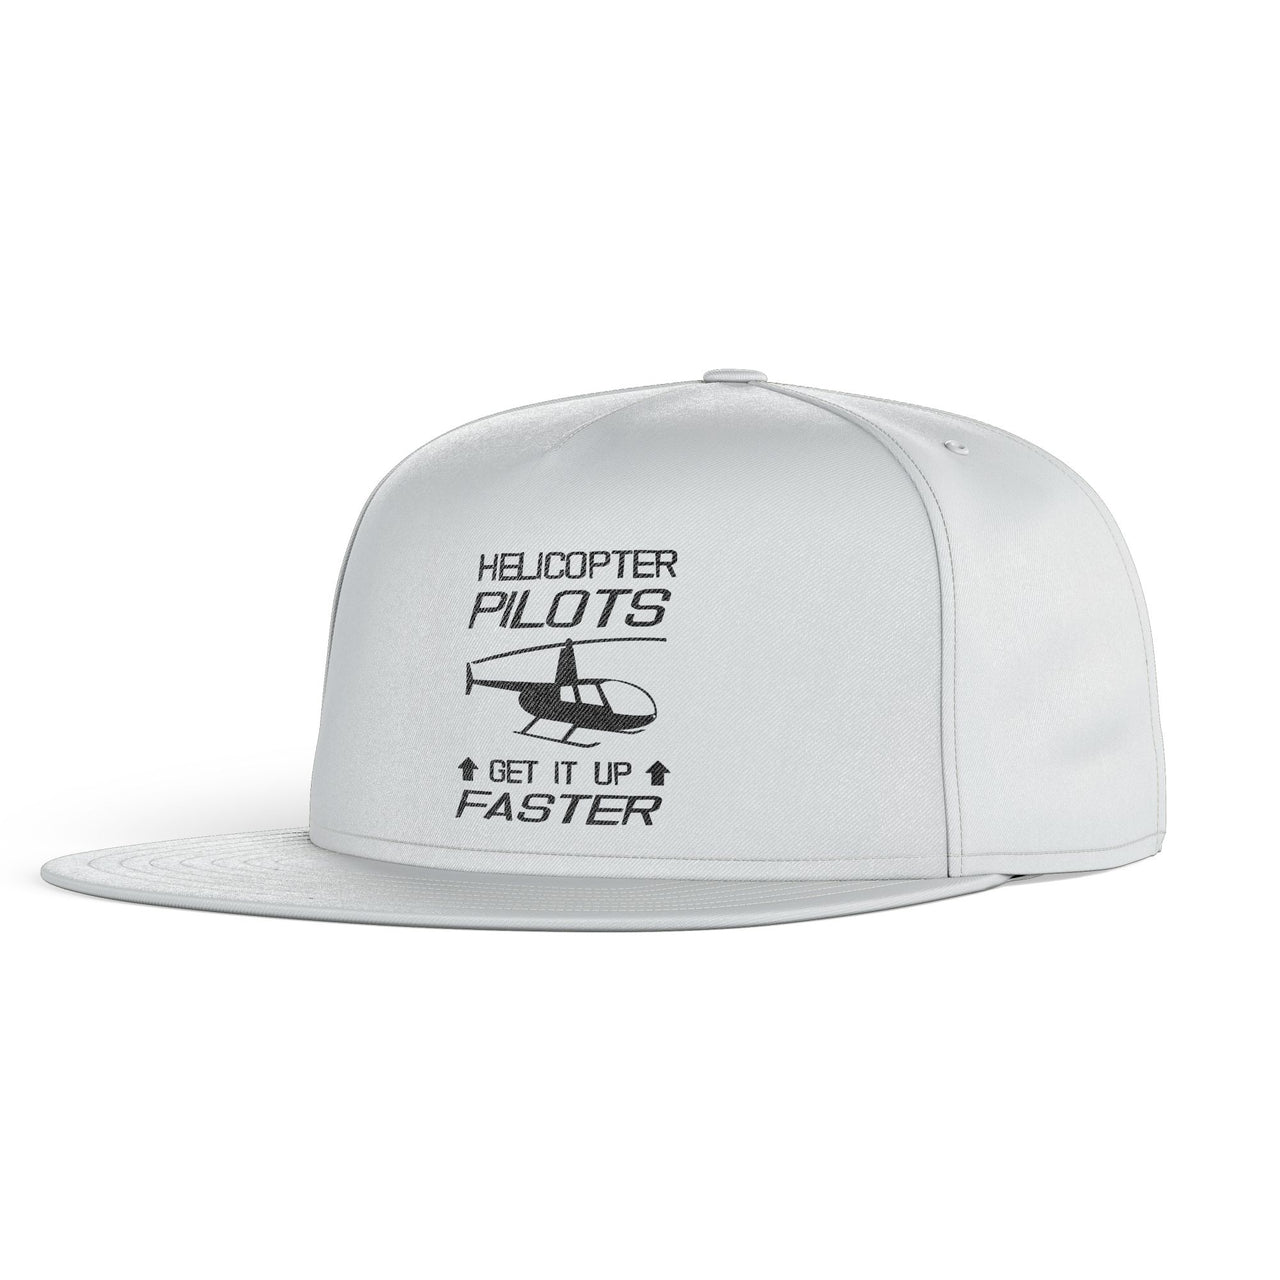 Helicopter Pilots Get It Up Faster Designed Snapback Caps & Hats